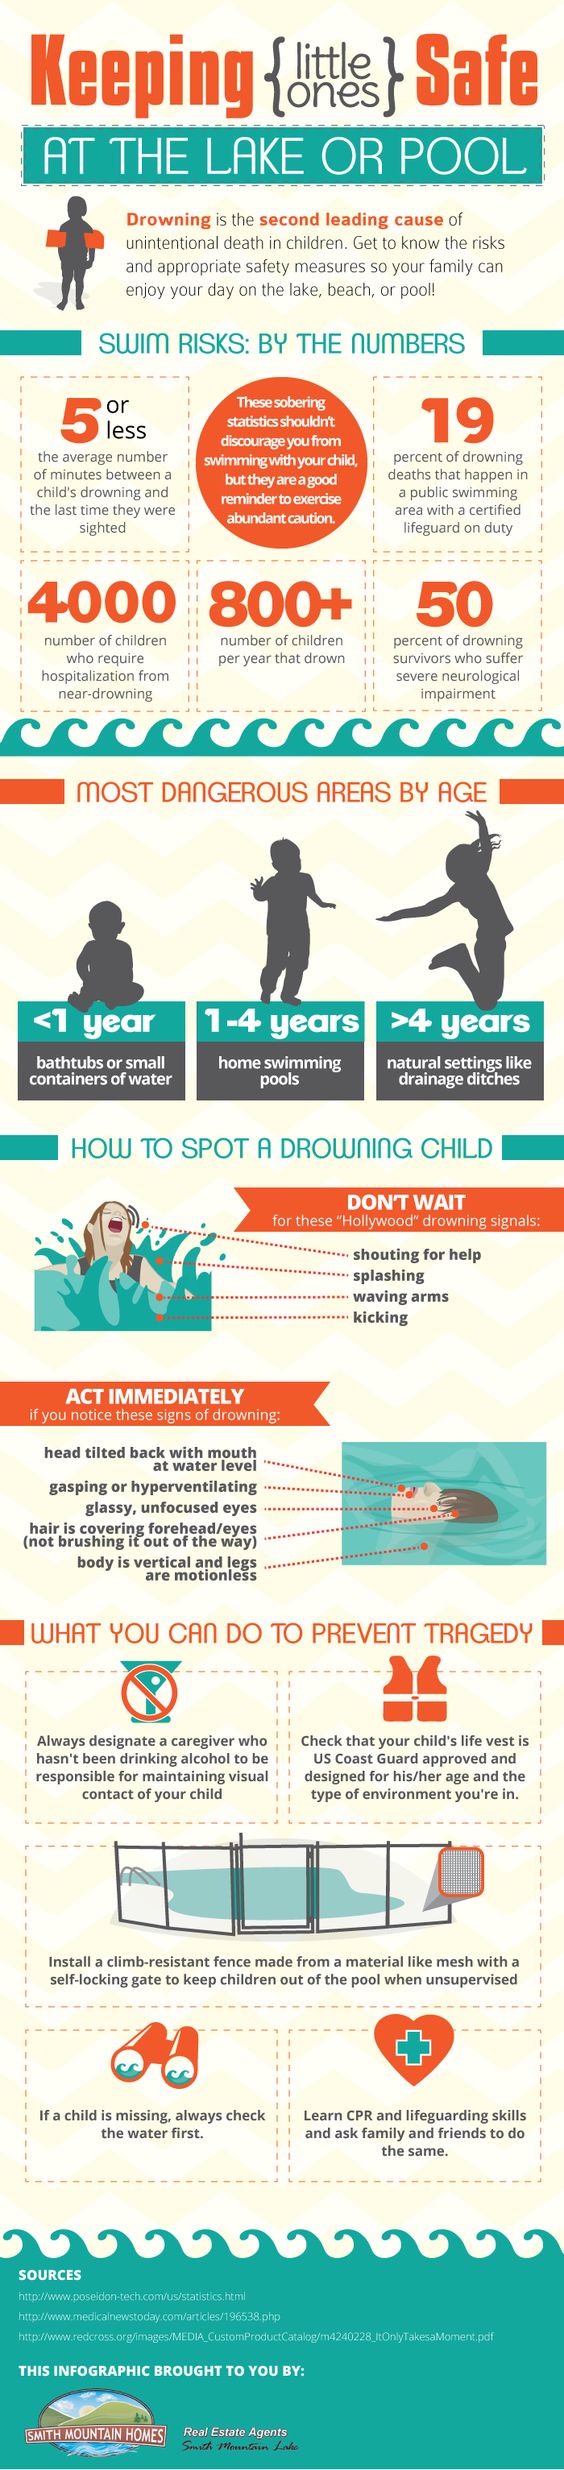 drowning infographic